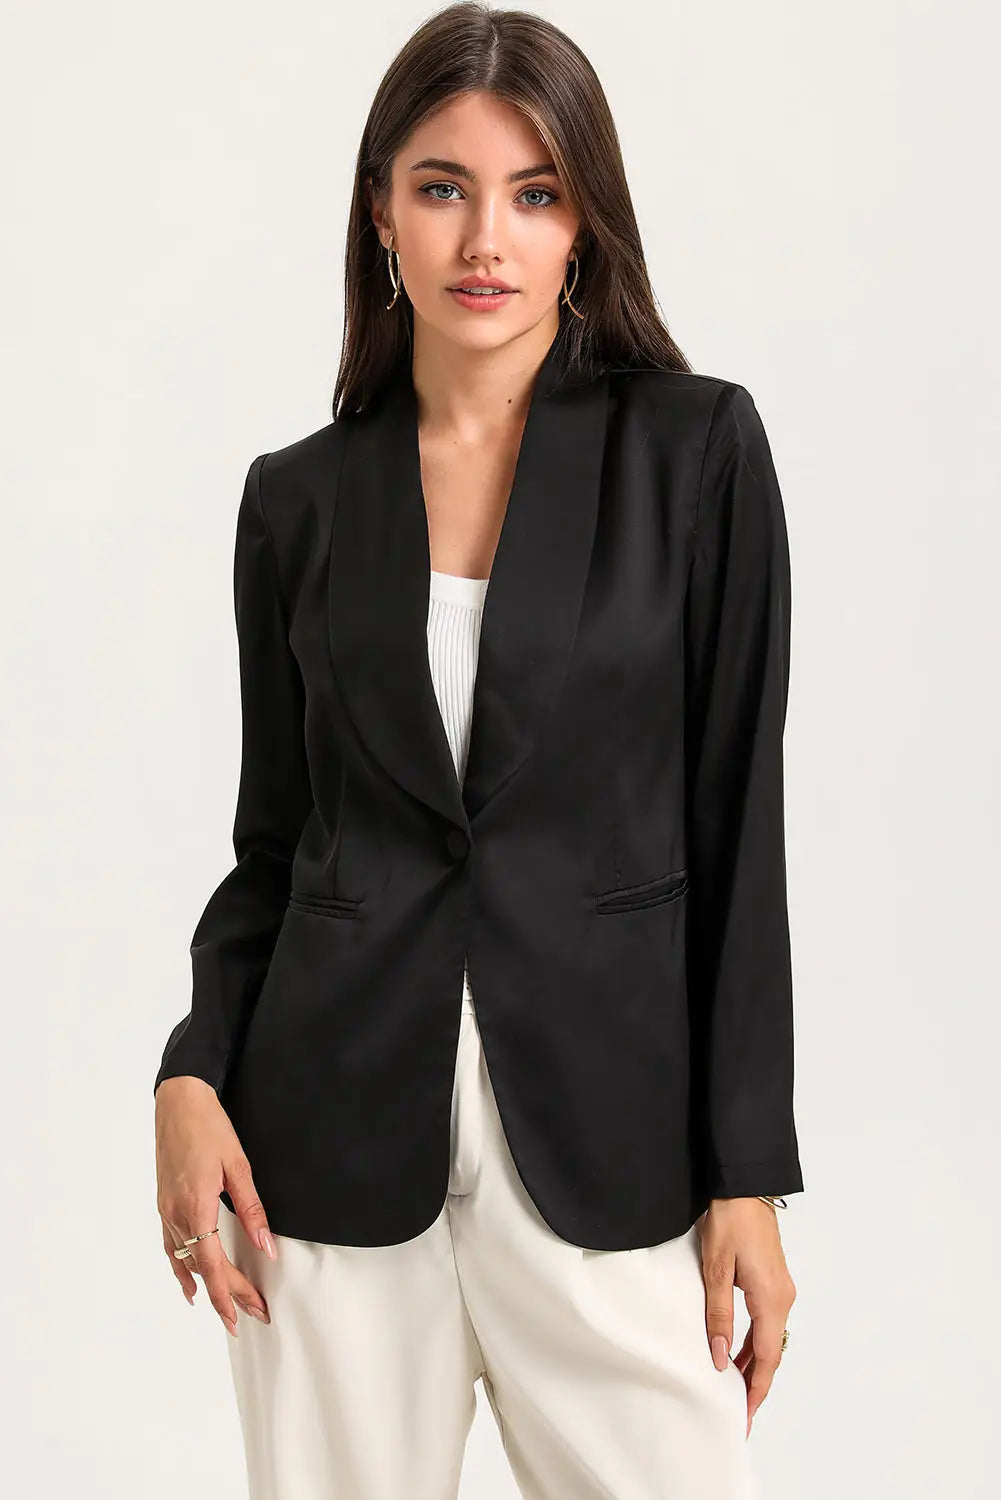 Black collared neck single breasted blazer with pockets - s / 90% polyester + 10% elastane - blazers